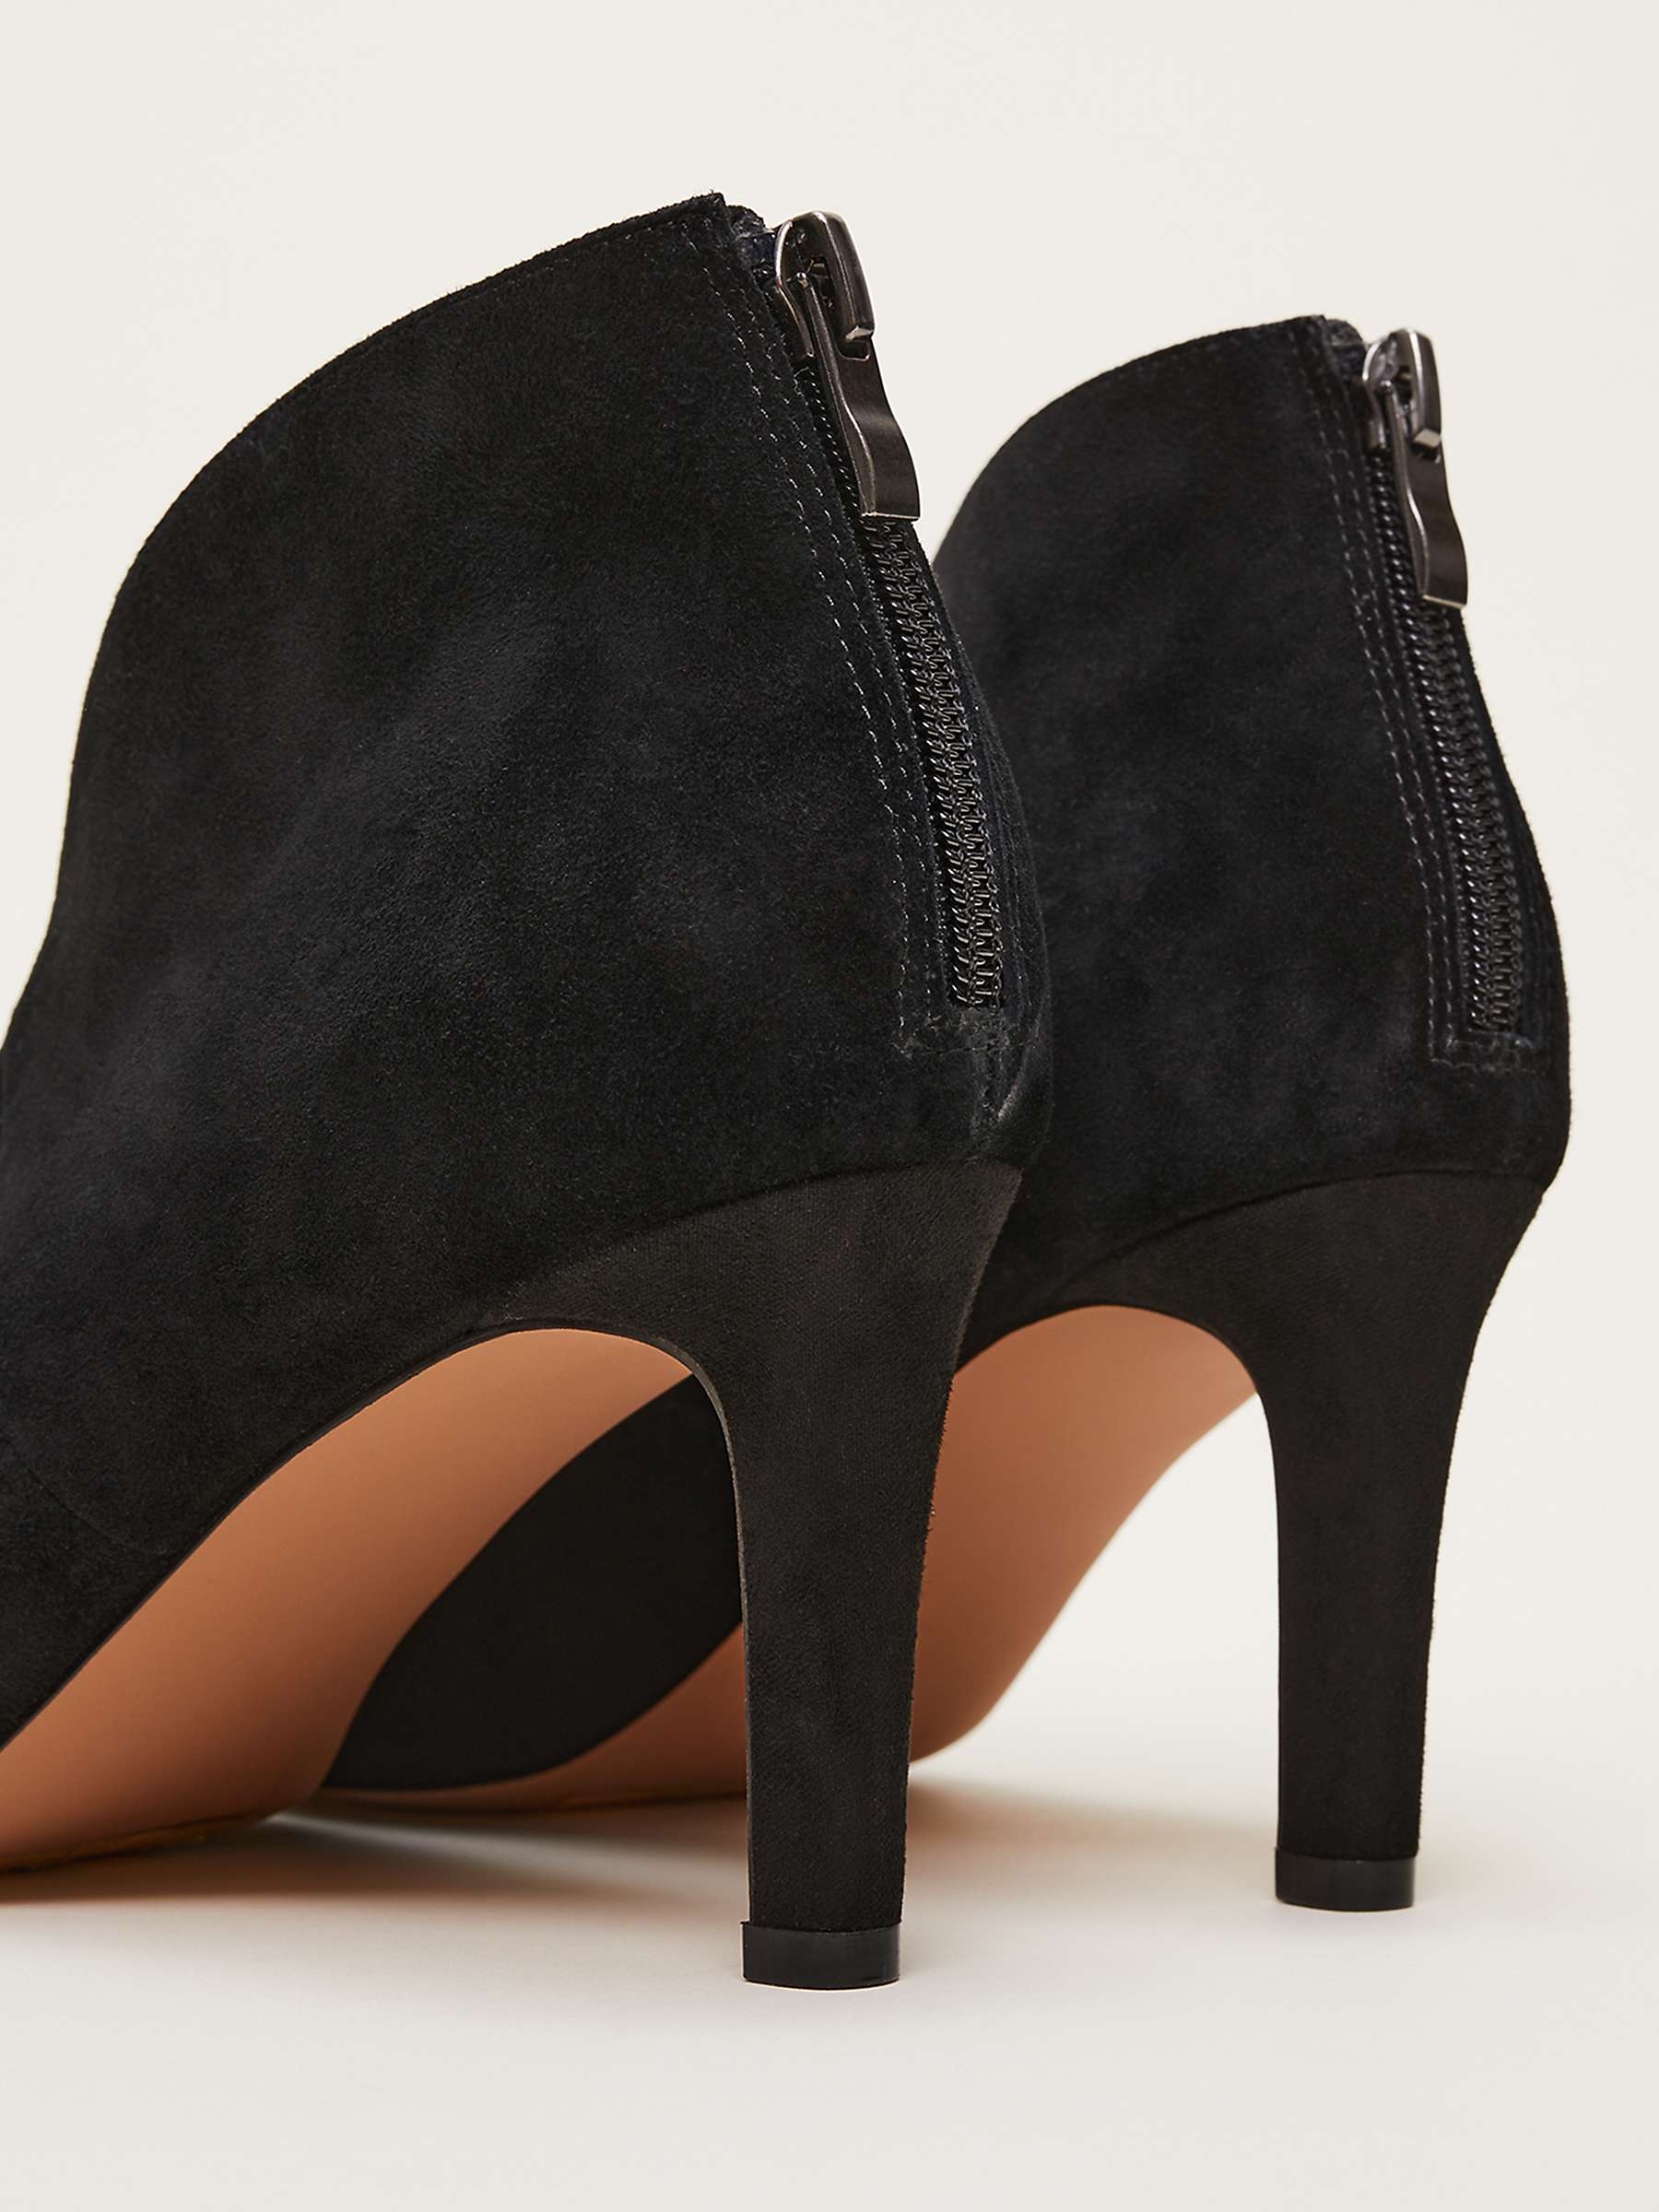 Buy Phase Eight Cut Out Suede Shoe Boots Online at johnlewis.com